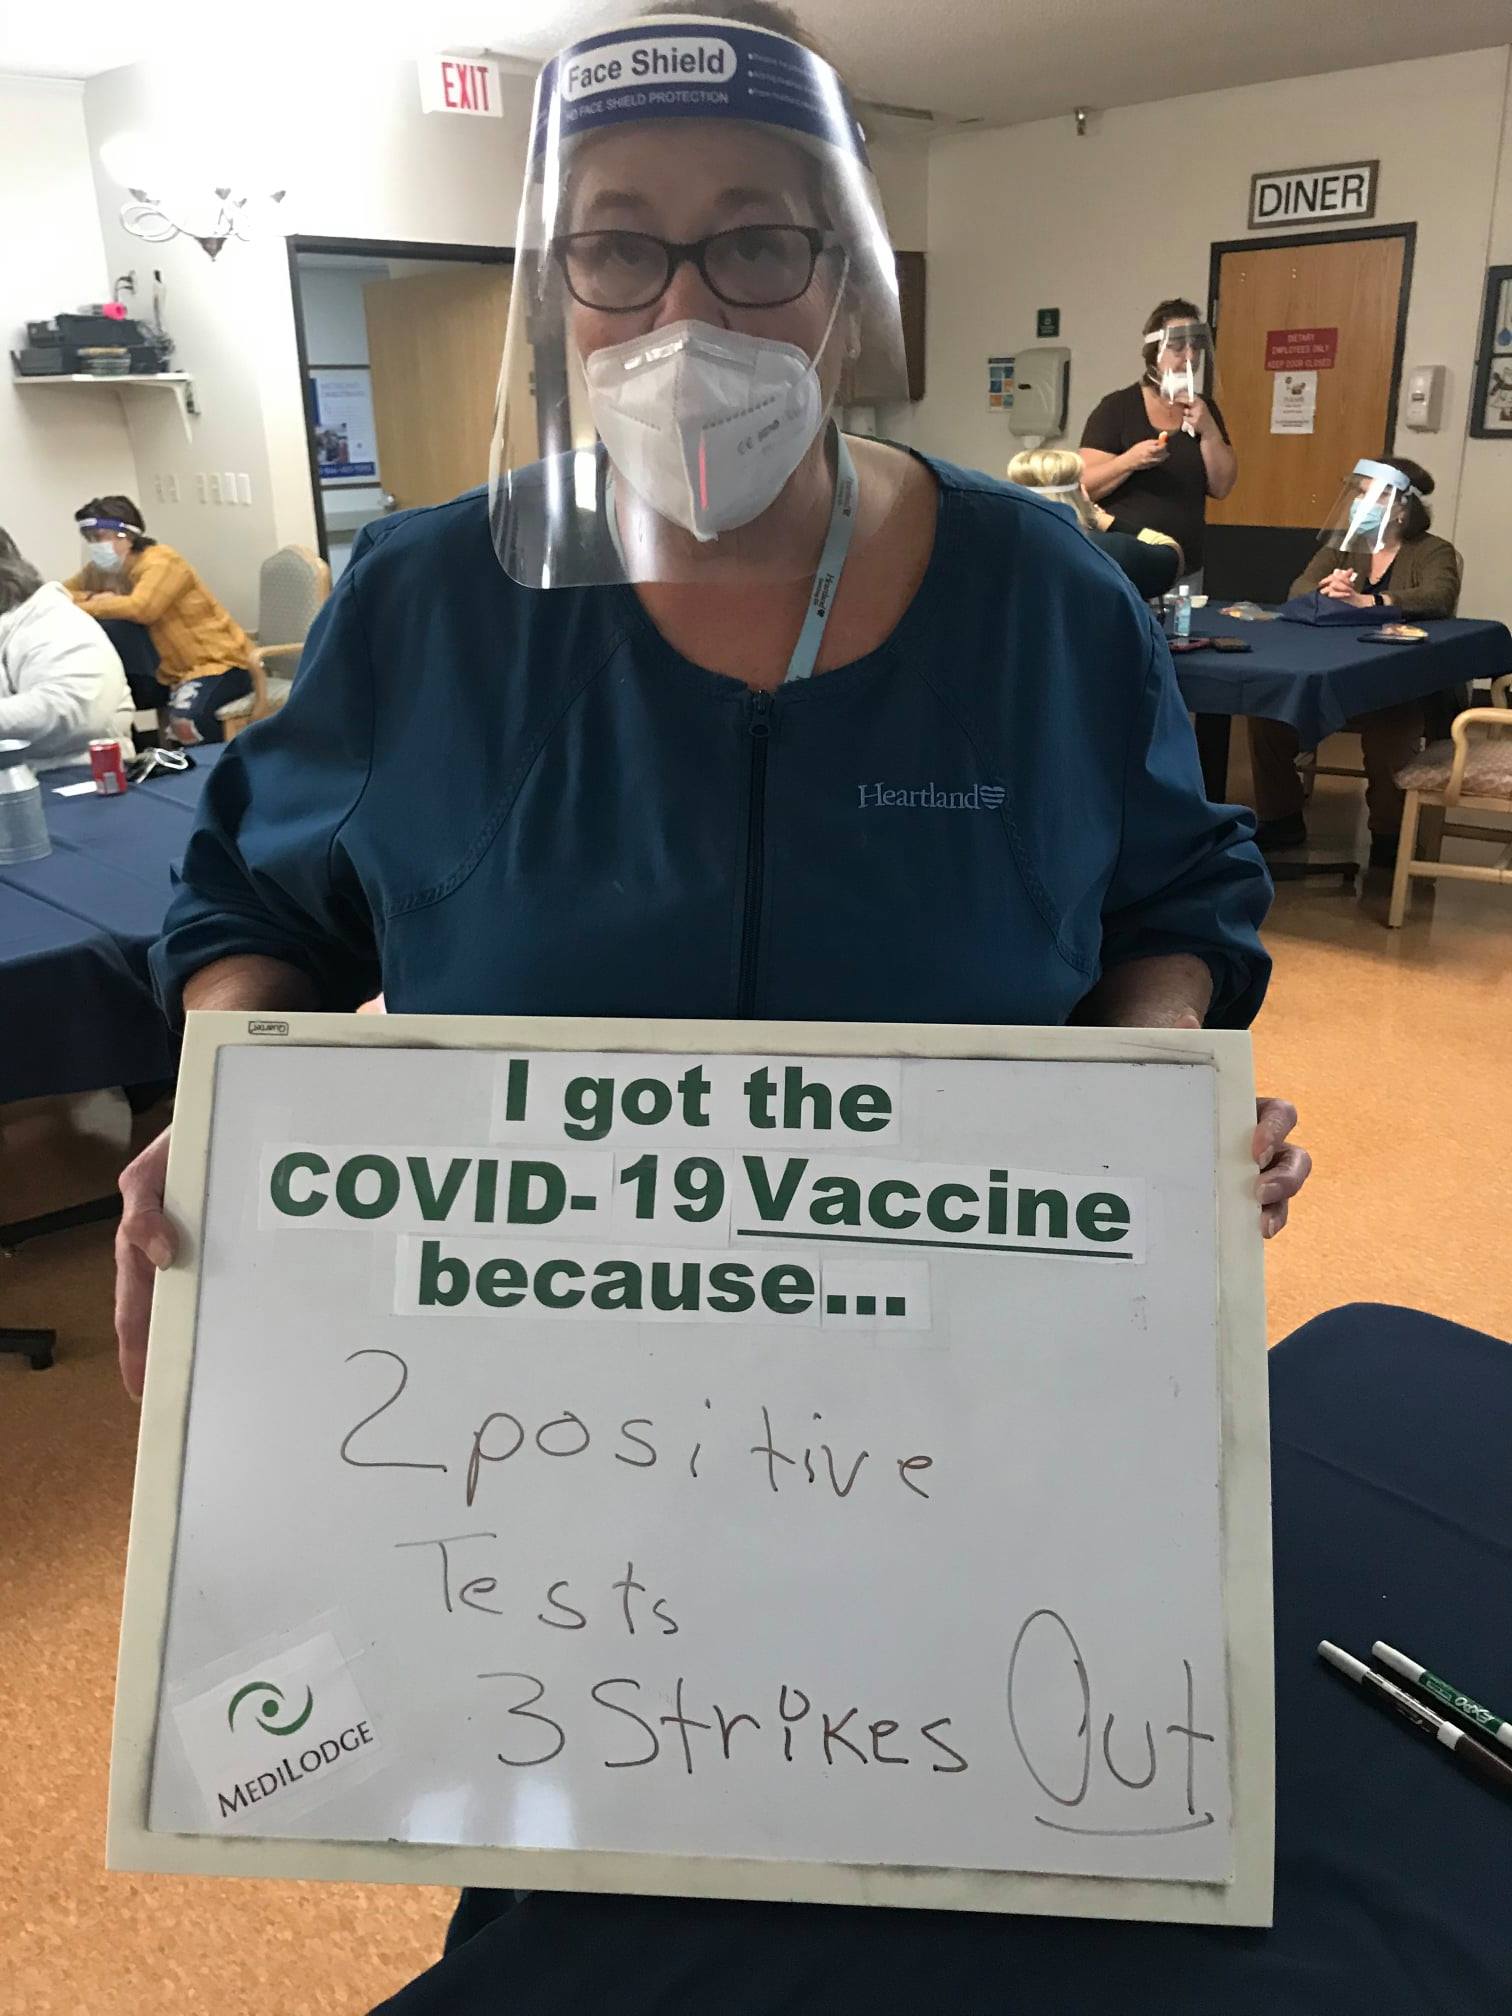 I got the COVID-19 vaccine because 2 positive test 3 strikes out